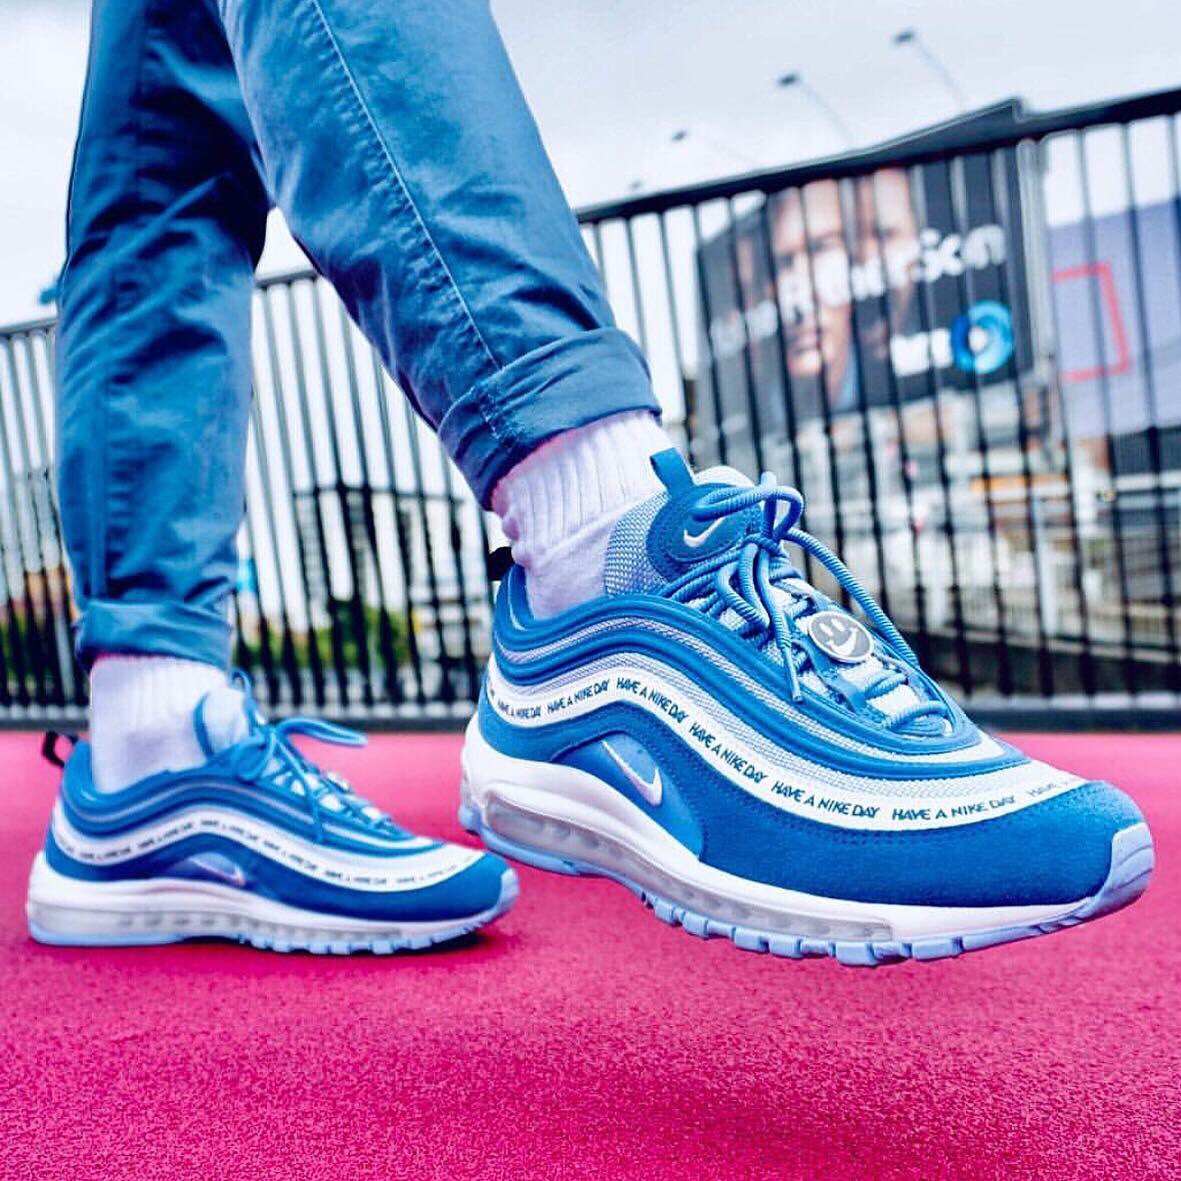 air max 97 have a nike day price